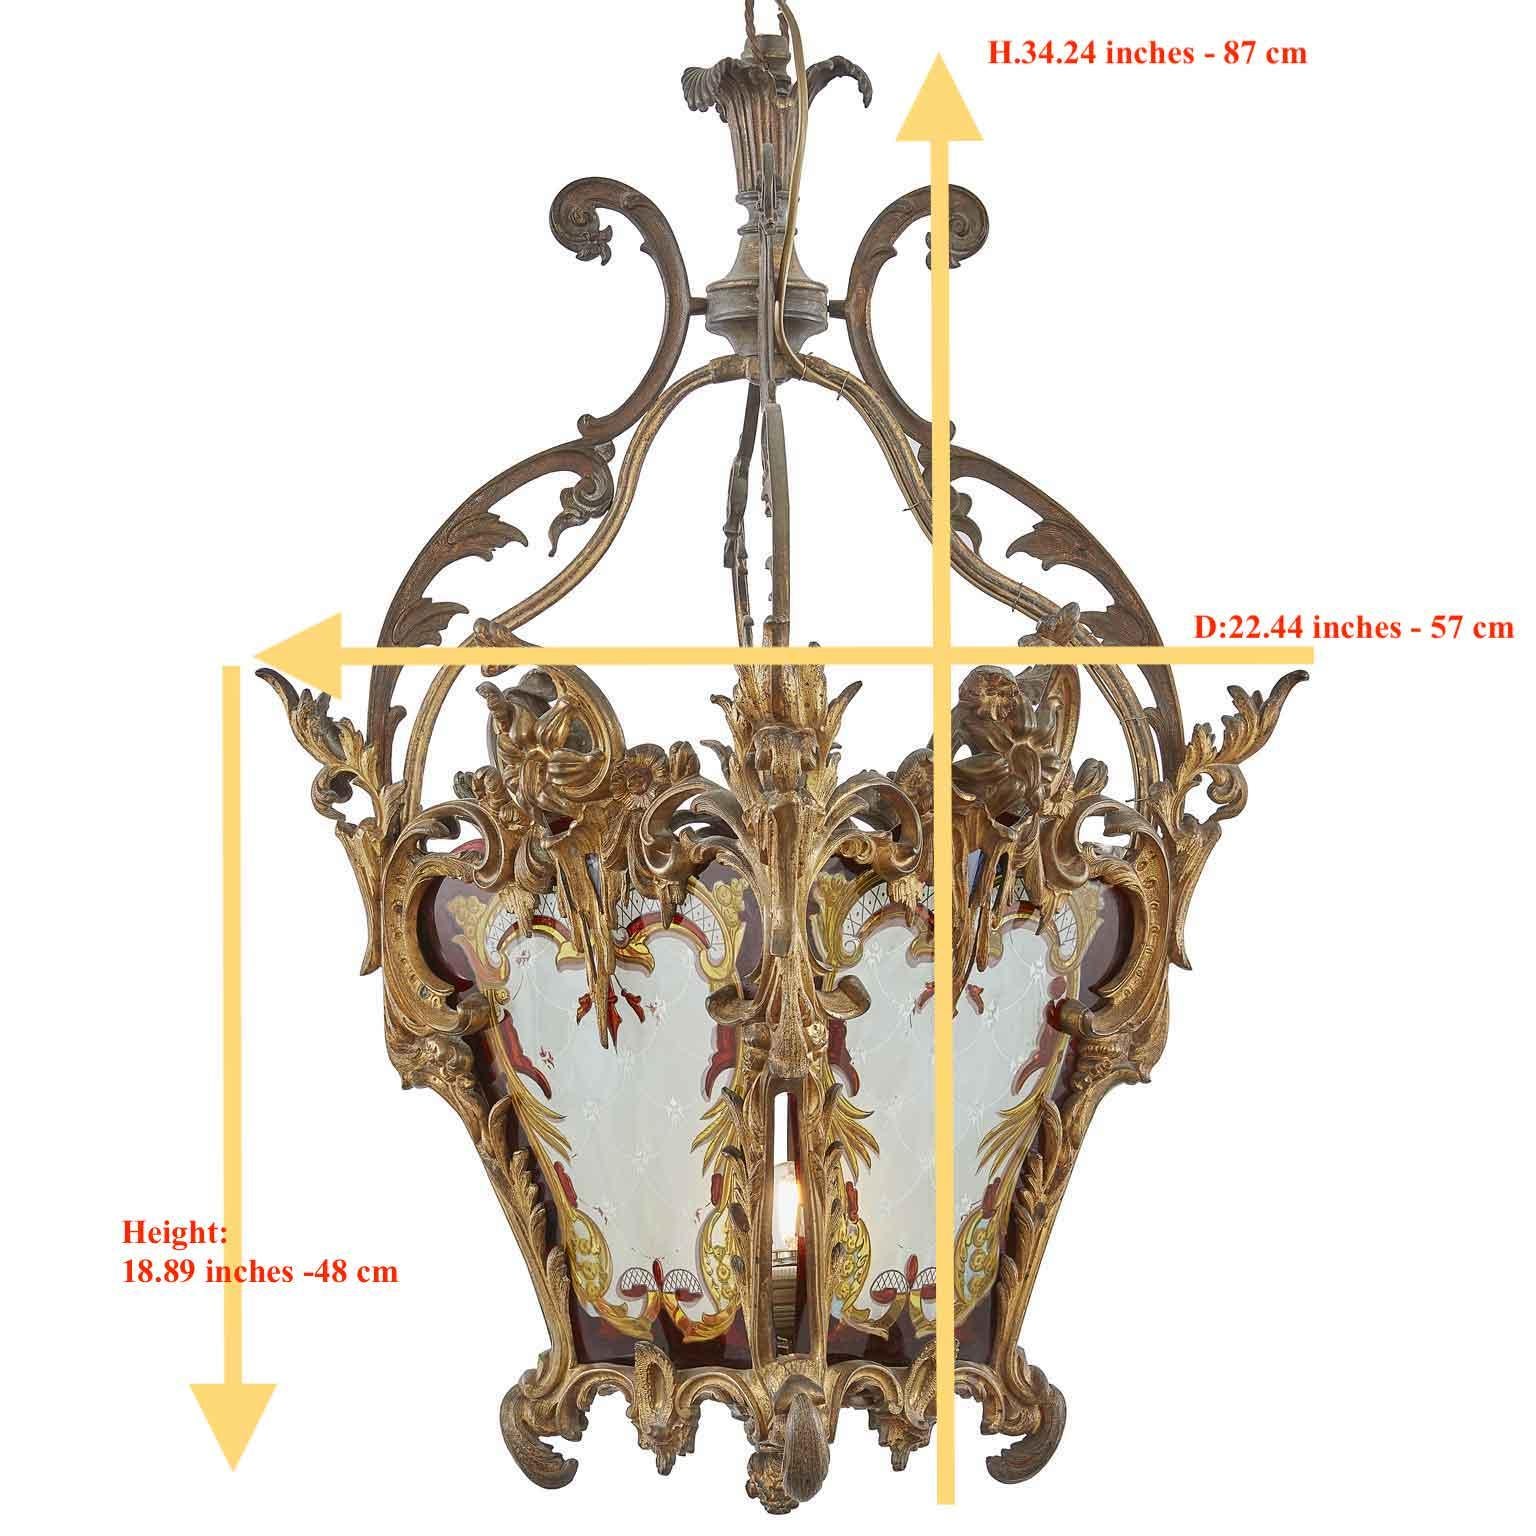 A charming antique Italian lantern, a cast bronze cage hall lantern with extraordinary original mercury gilding dating back to the third quarter of 19th century.
Italian origin, born for gas burning, realized around 1870 with great casting, richly